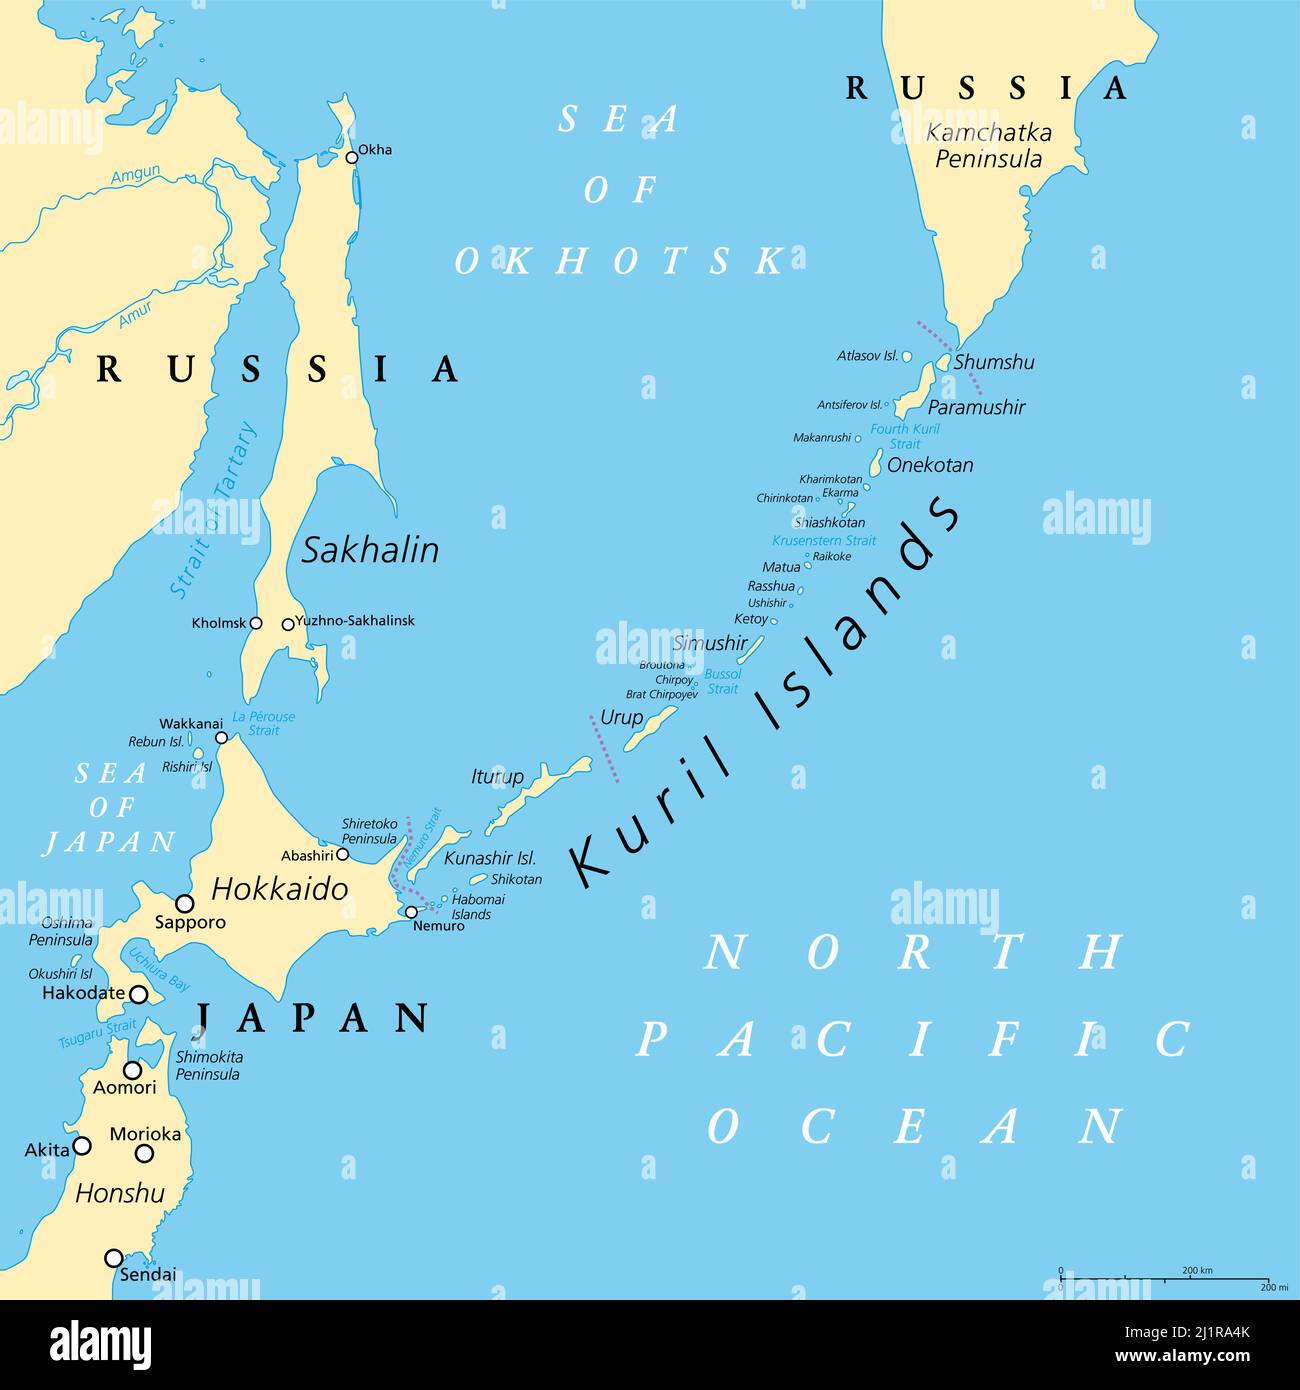 Kuril Islands political map. A volcanic archipelago part of Sakhalin Oblast in the Russian Far East. It stretches from Hokkaido in Japan to Kamchatka. Stock Photo